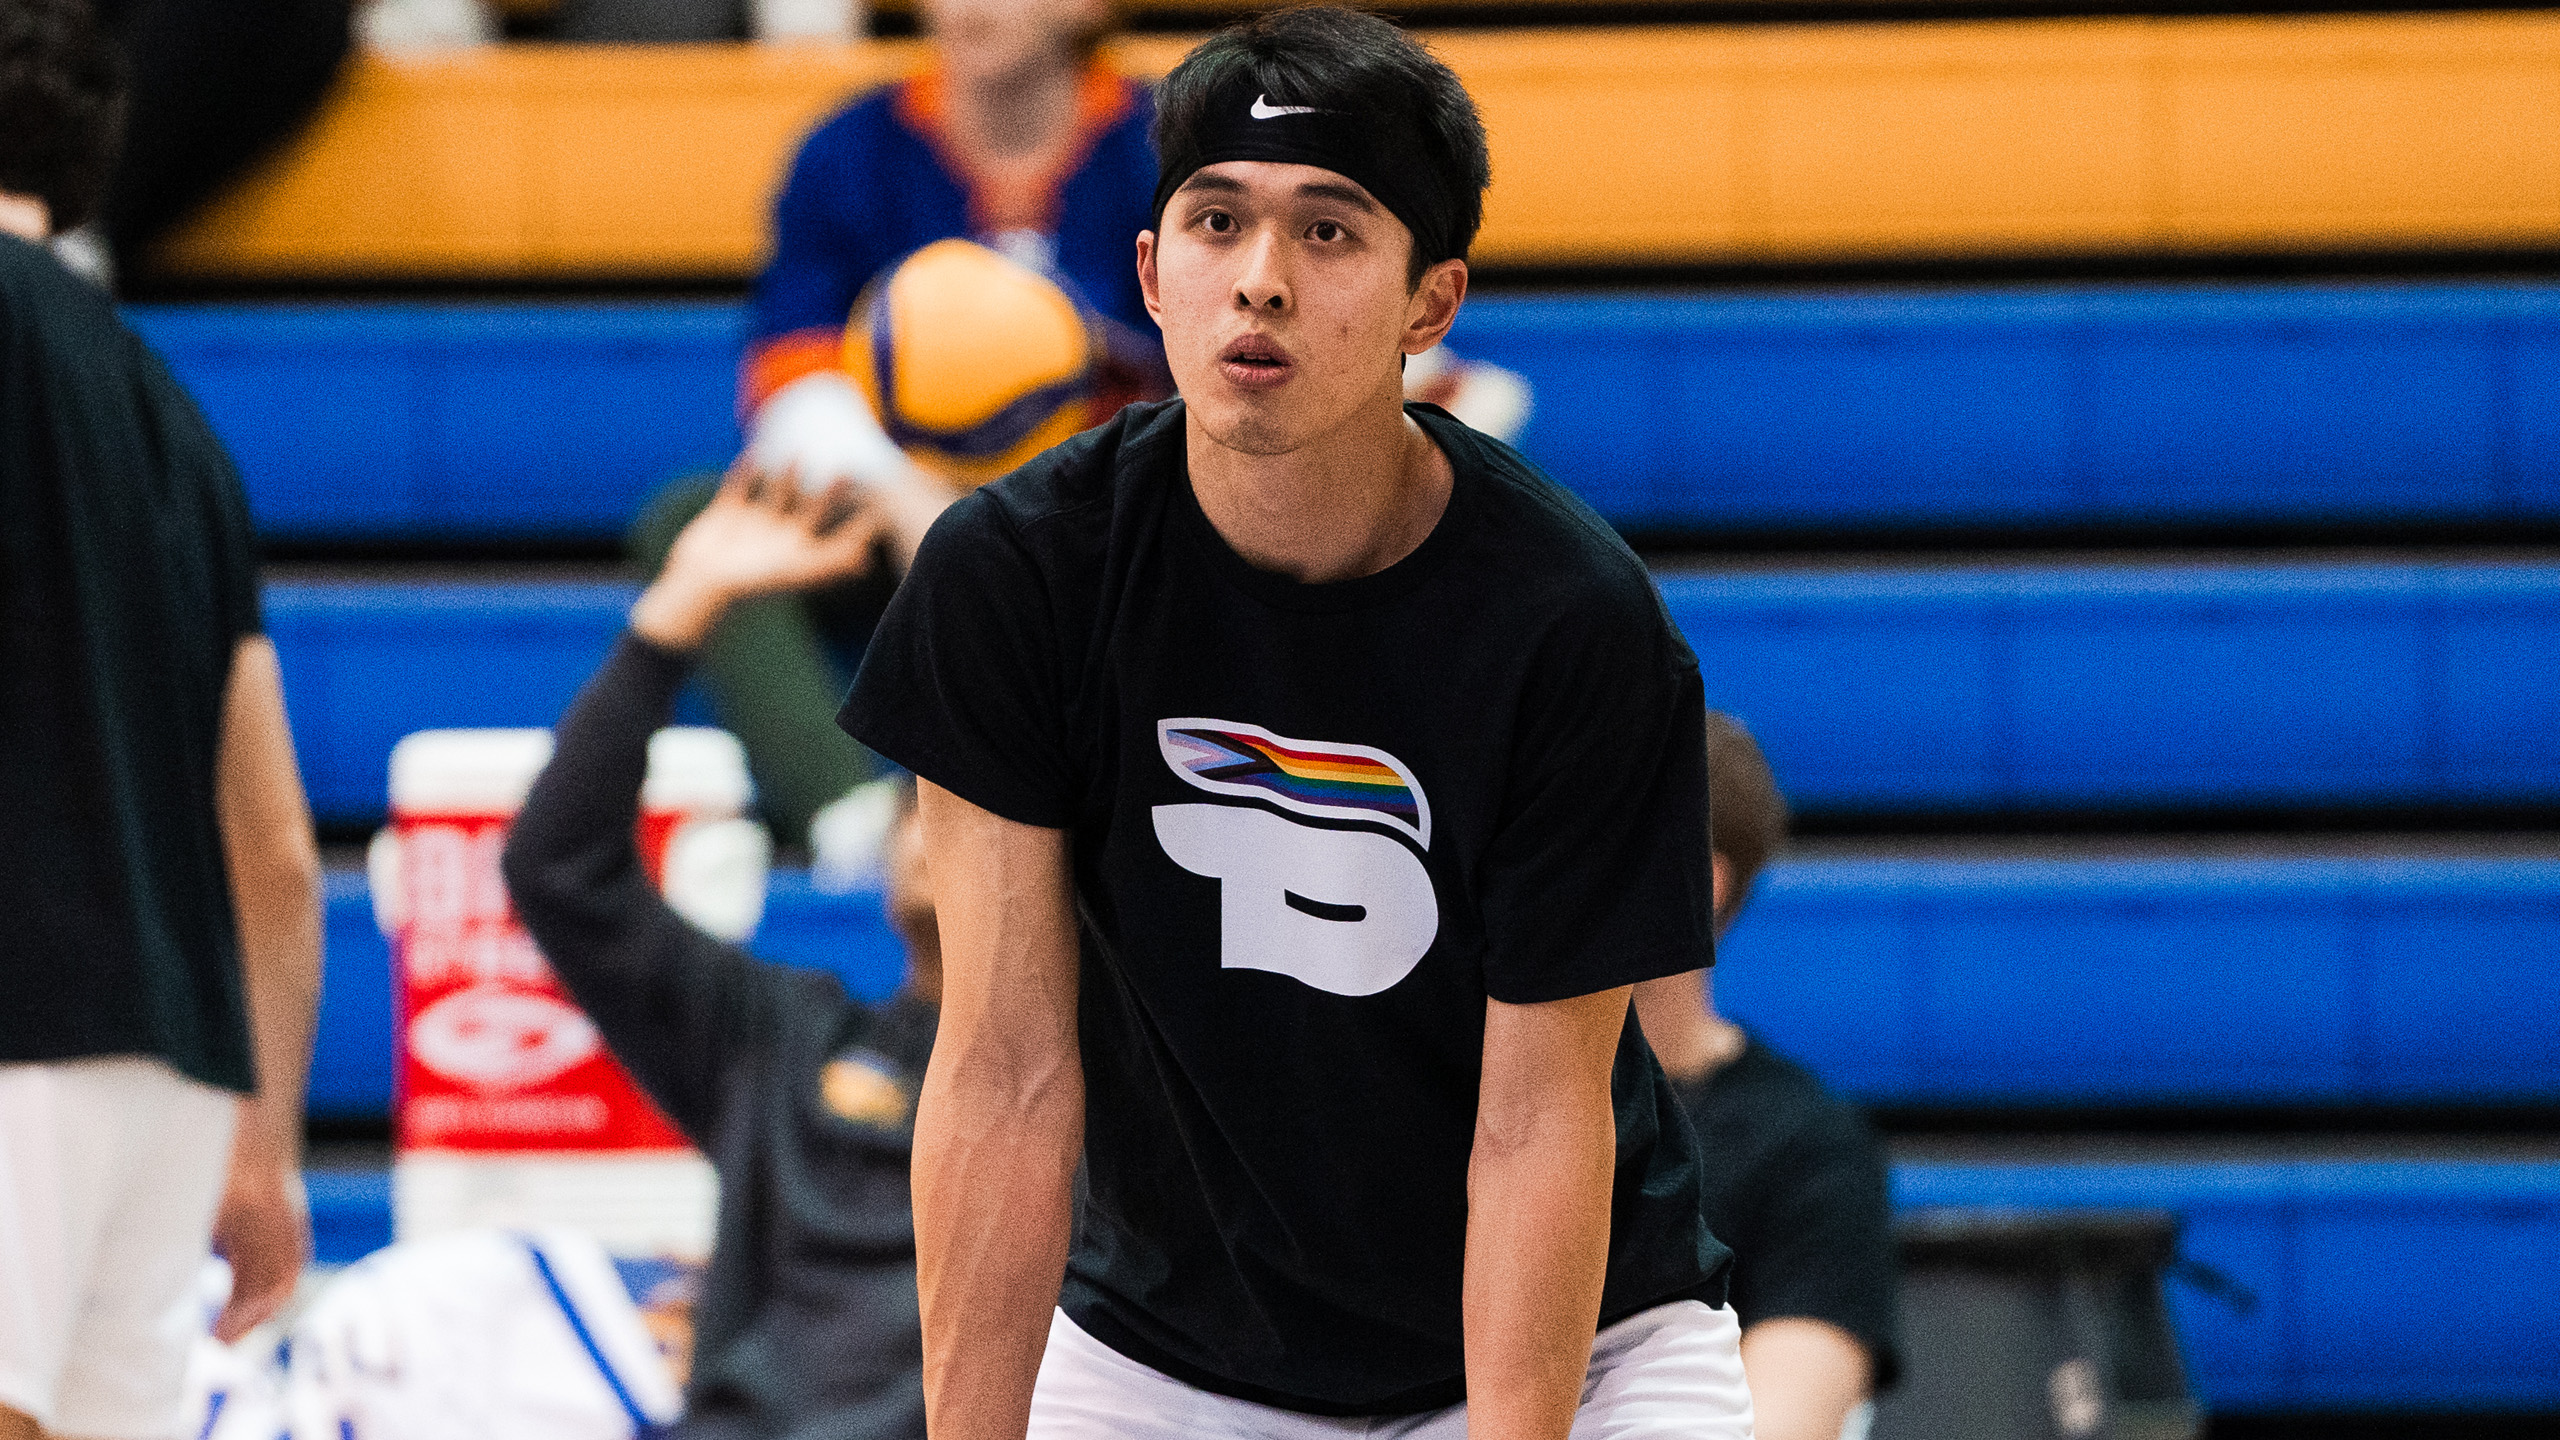 TMU men's volleyball player Bobby Tang wears the Bold Pride shirt in warmups